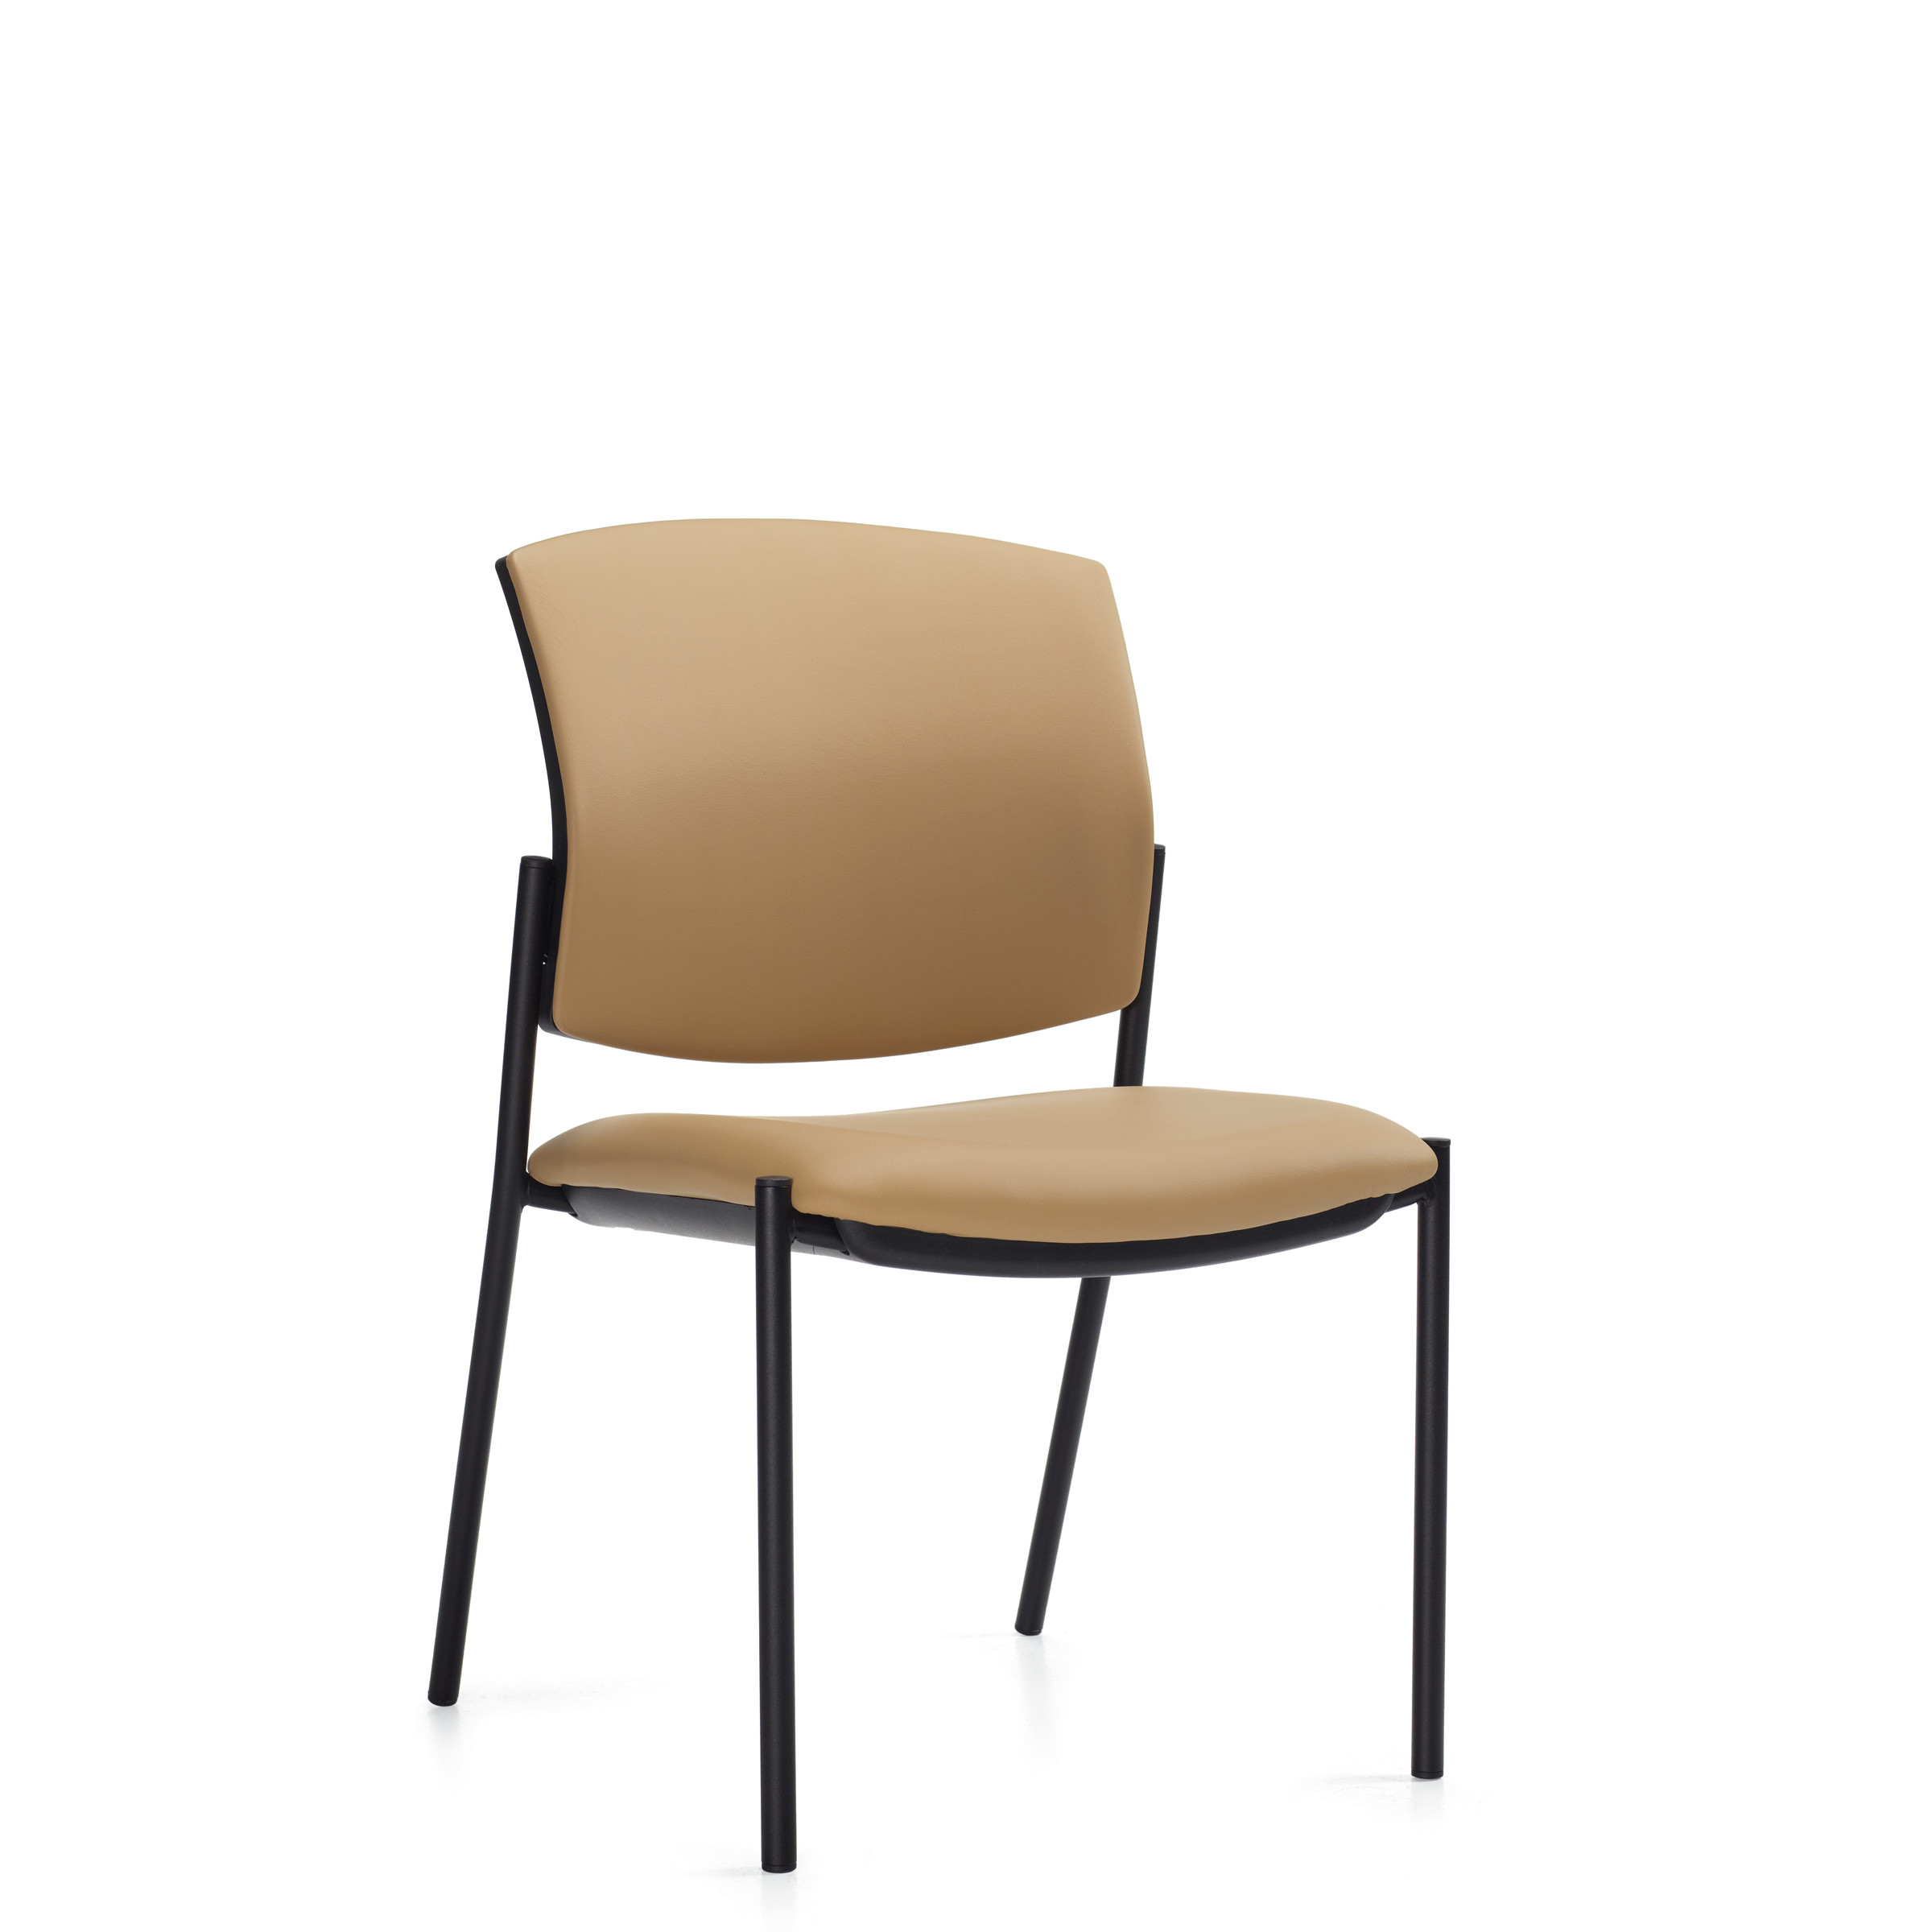 Ibex | Upholstered Seat & Back Armless Guest Chair